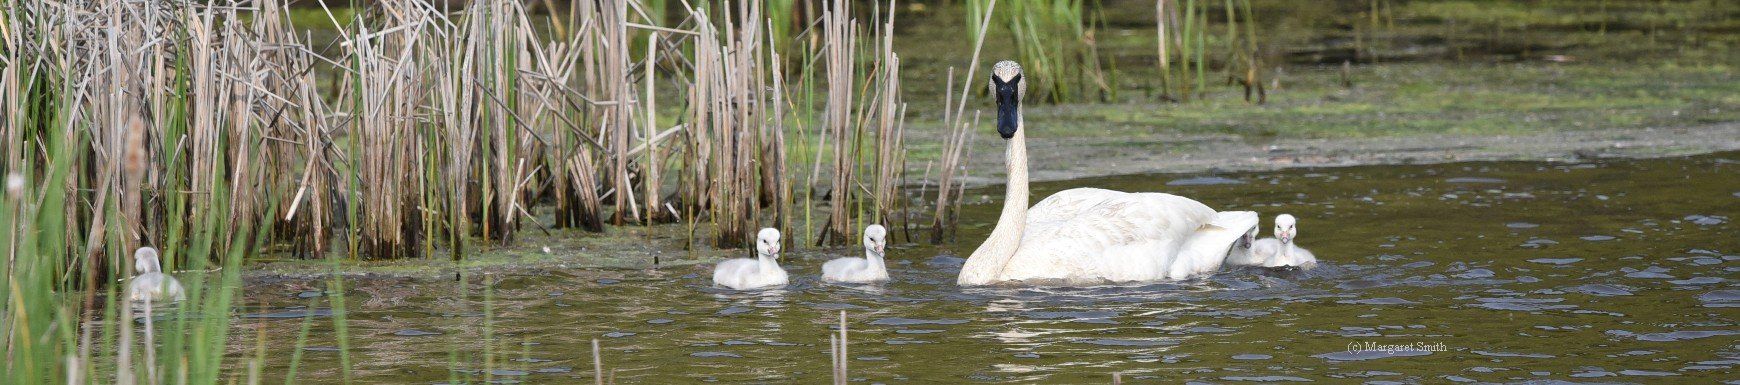 Your tax deductible donation shows your love for swan conservation